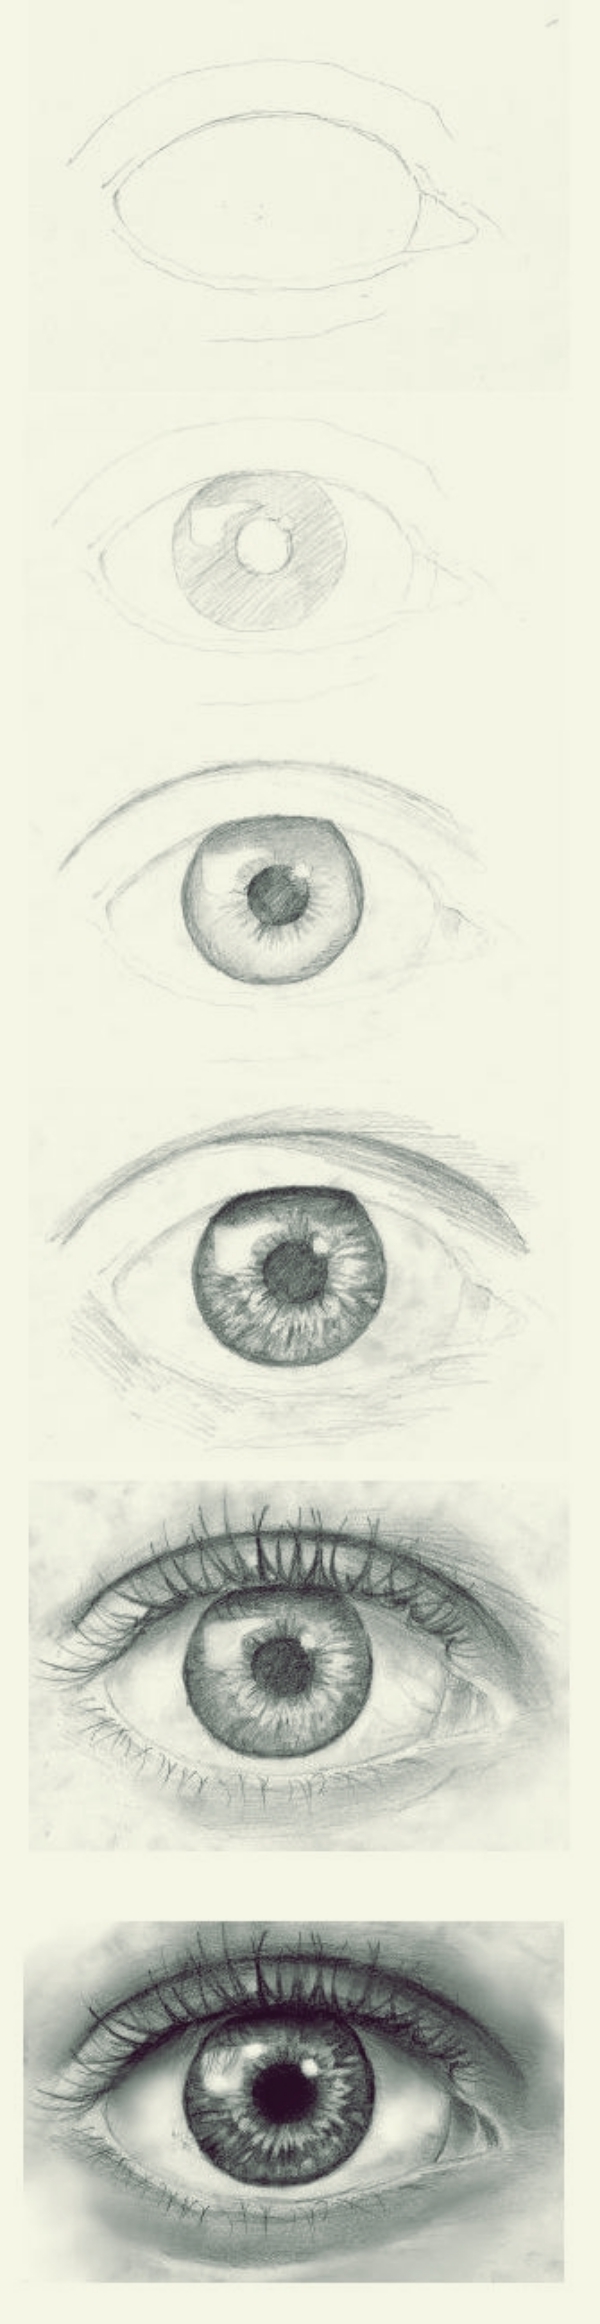 How to Draw an Eye (Step by Step Pictures Guides)